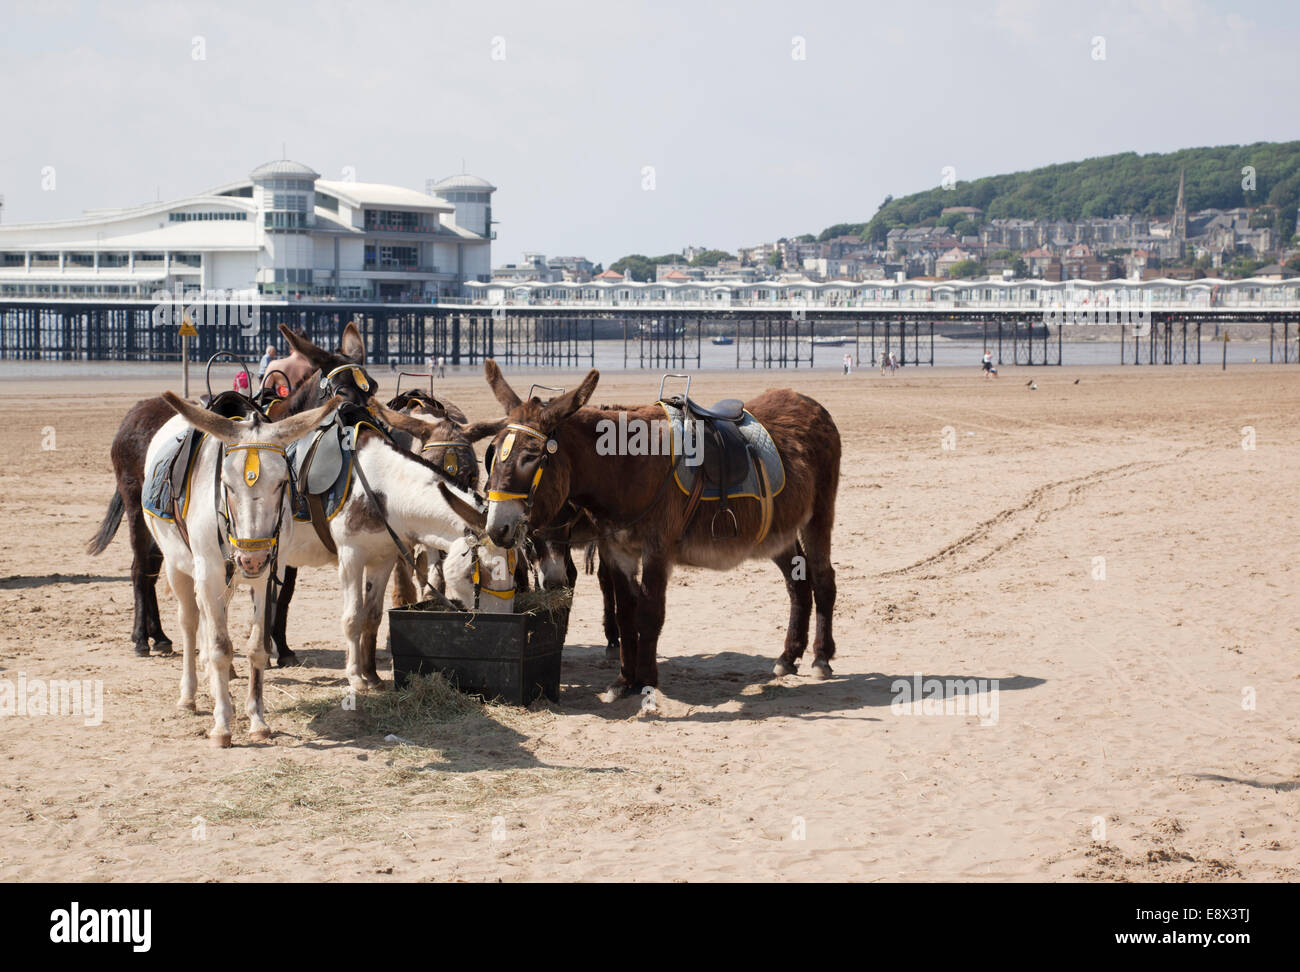 The donkeys on Weston Super Mare beach with the The Grand Pier in the background, Somerset, England, UK Stock Photo